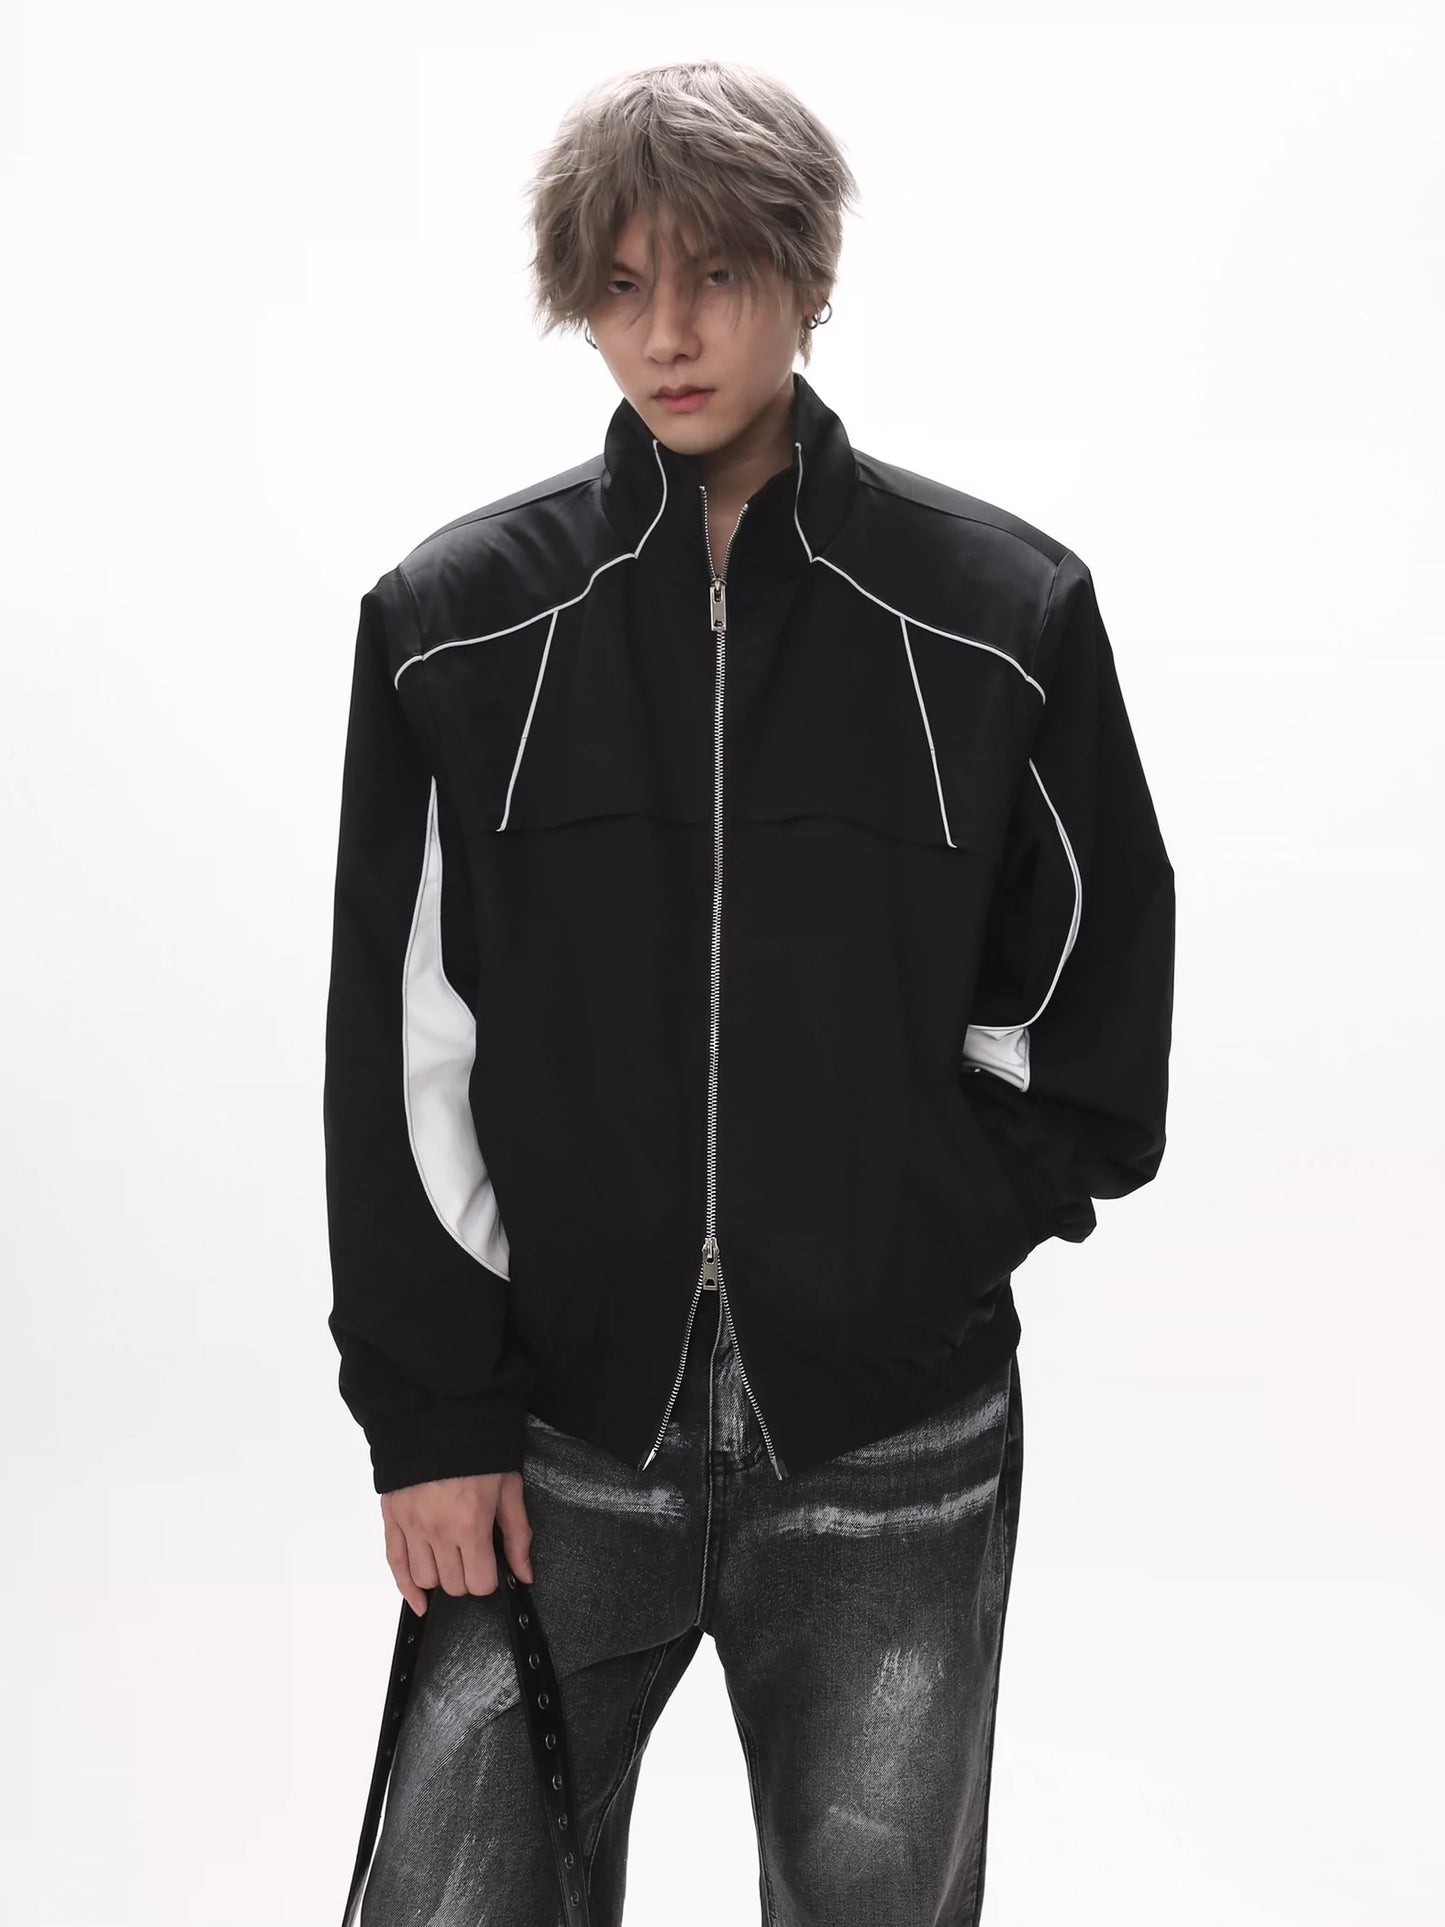 GIBBYCNA STITCHING CONTRAST REFLECTIVE STRIP STAND COLLAR CROPPED JACKET MEN'S HIGH ARCADE LOOSE TOP JACKET TRENDY